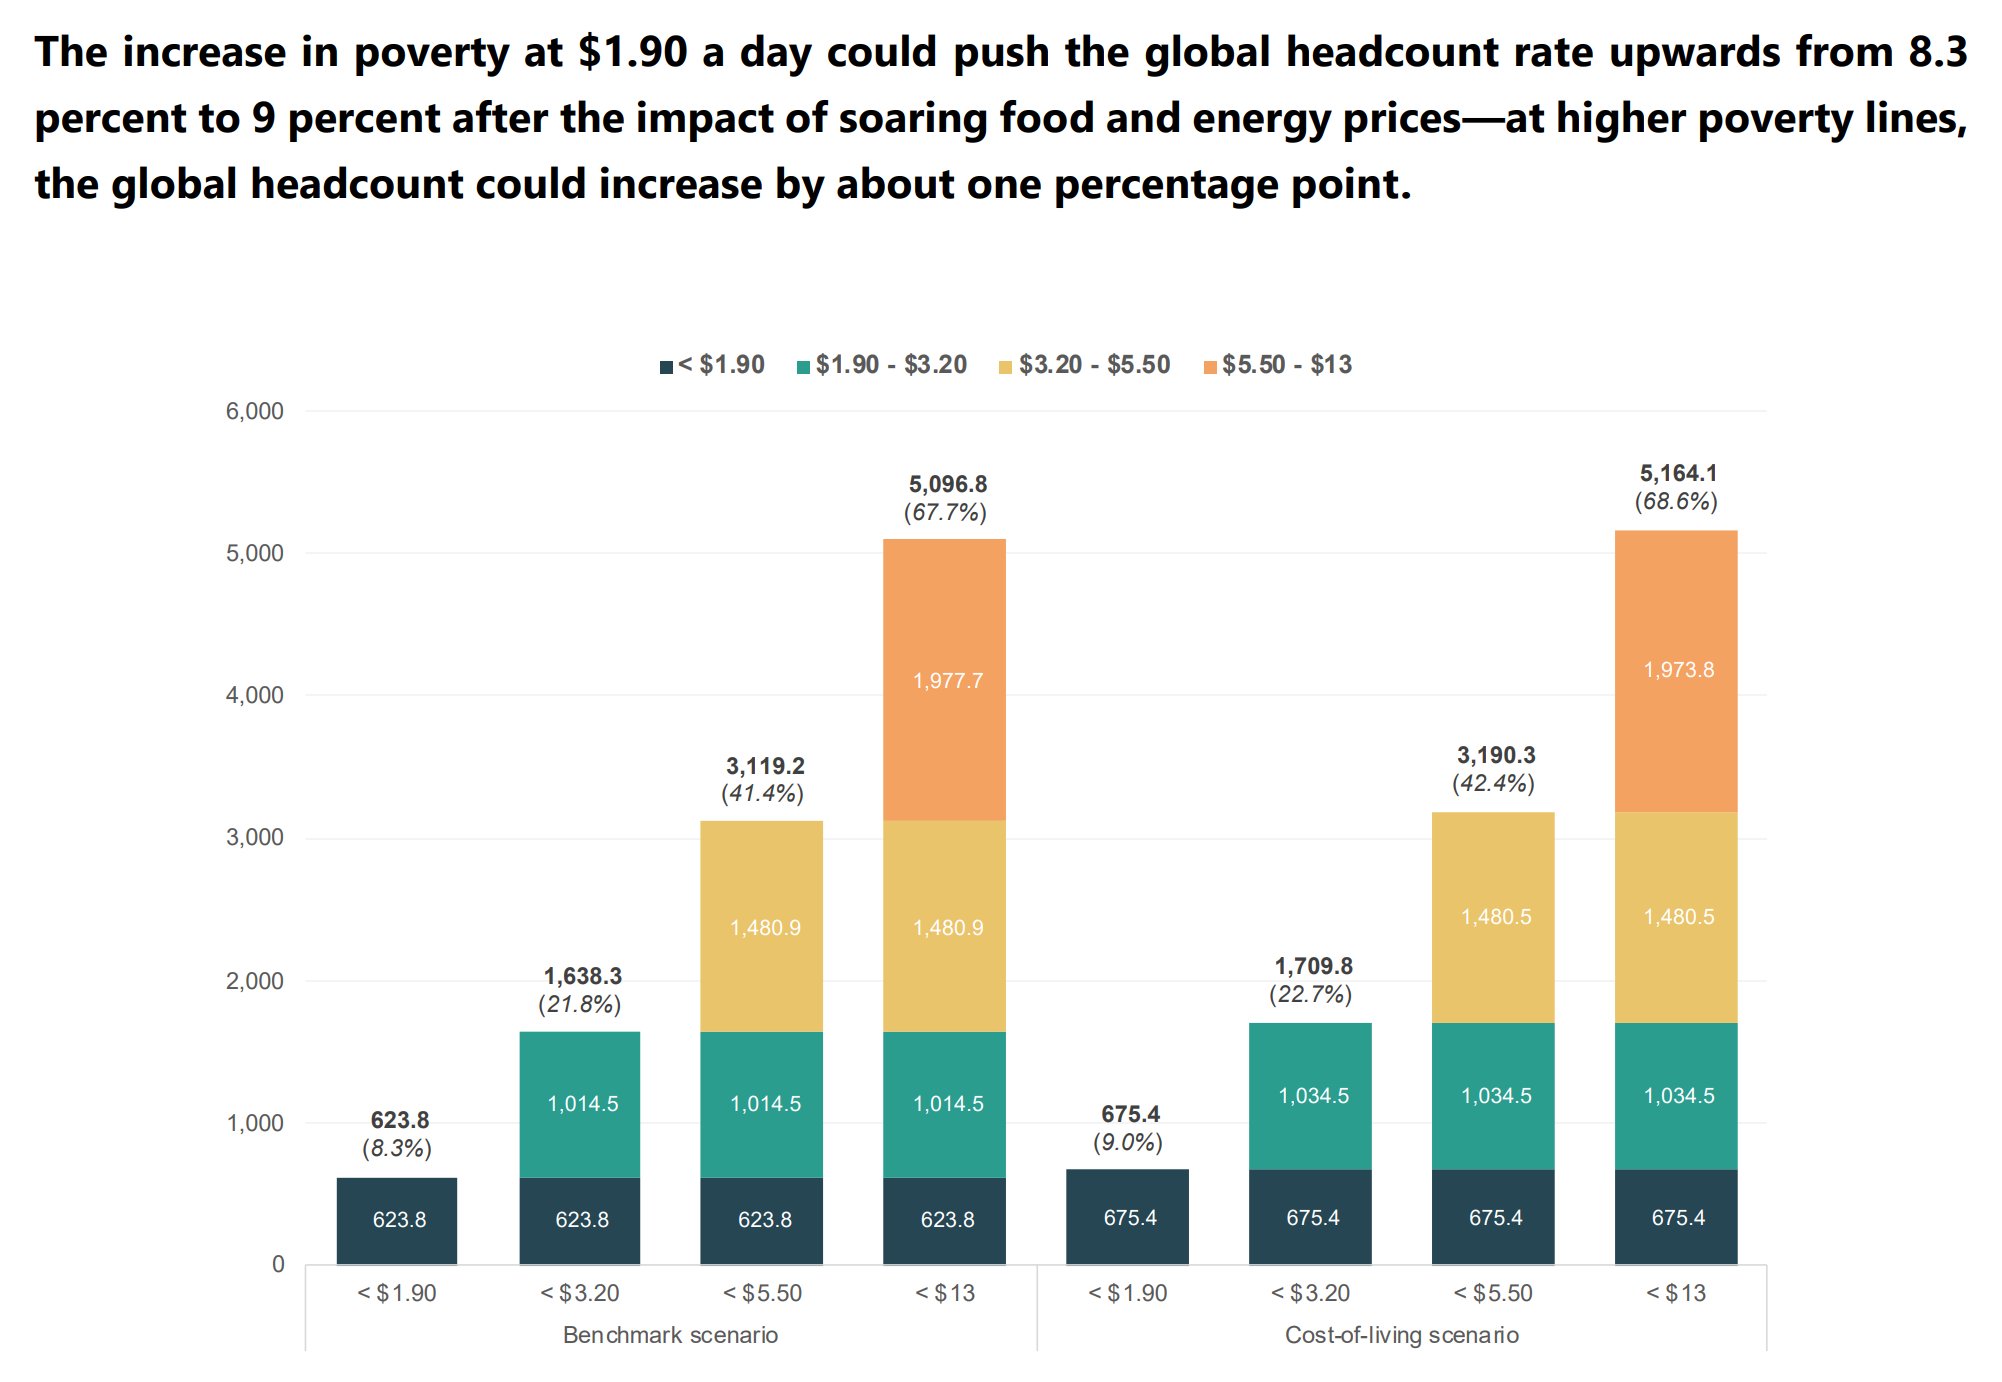 Projections of the number of people living in poverty and vulnerability to poverty under different monetary thresholds for both benchmark and cost-of-living scenarios (million people and percentages of the global population atop each bar). The increase in poverty at $1.90 a day could push the global headcount rate upwards from 8.3 percent to 9 percent after the impact of soaring food and energy prices—at higher poverty lines, the global headcount could increase by about one percentage point. The figures within each bar’s portions correspond to the population living either under $1.90 a day or within the indicated intervals above $1.90. Data: Authors’ own elaboration based on the sources described in the text. Graphic: UNDP